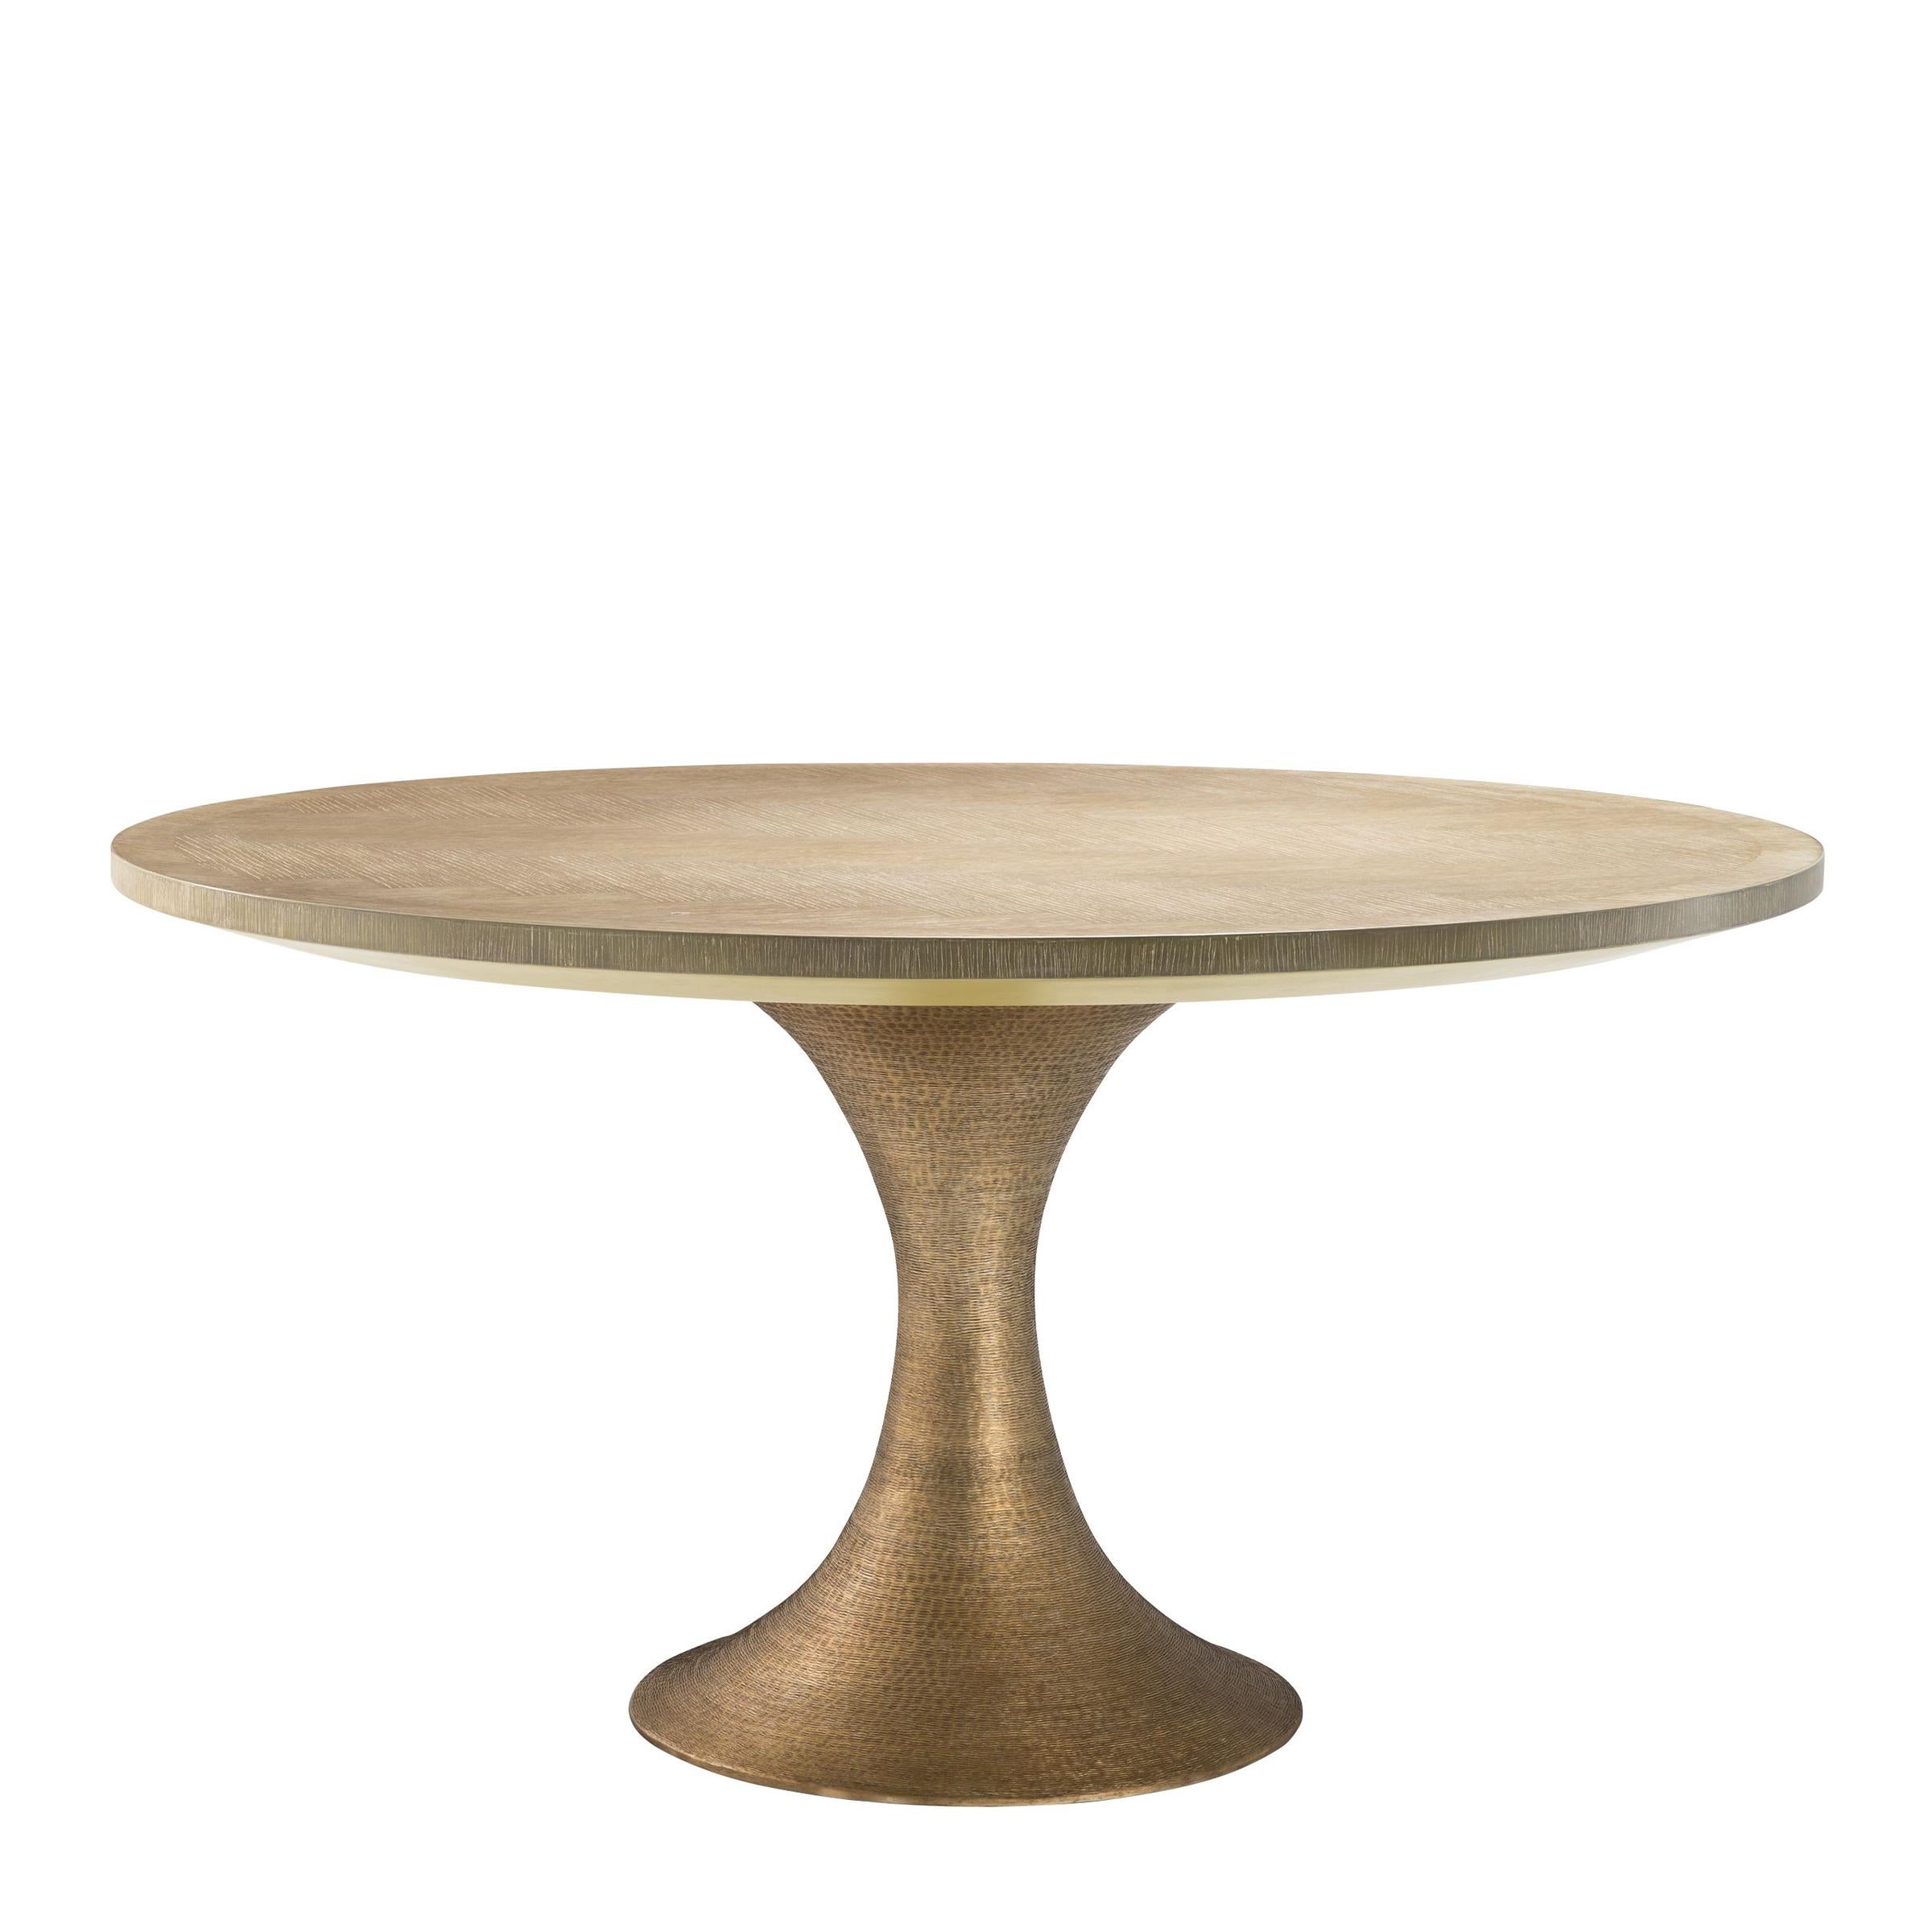 Dining table hammered round with washed oak
veneer top. On hammered brushed brass base.
Also available in black oak on black bronze base.